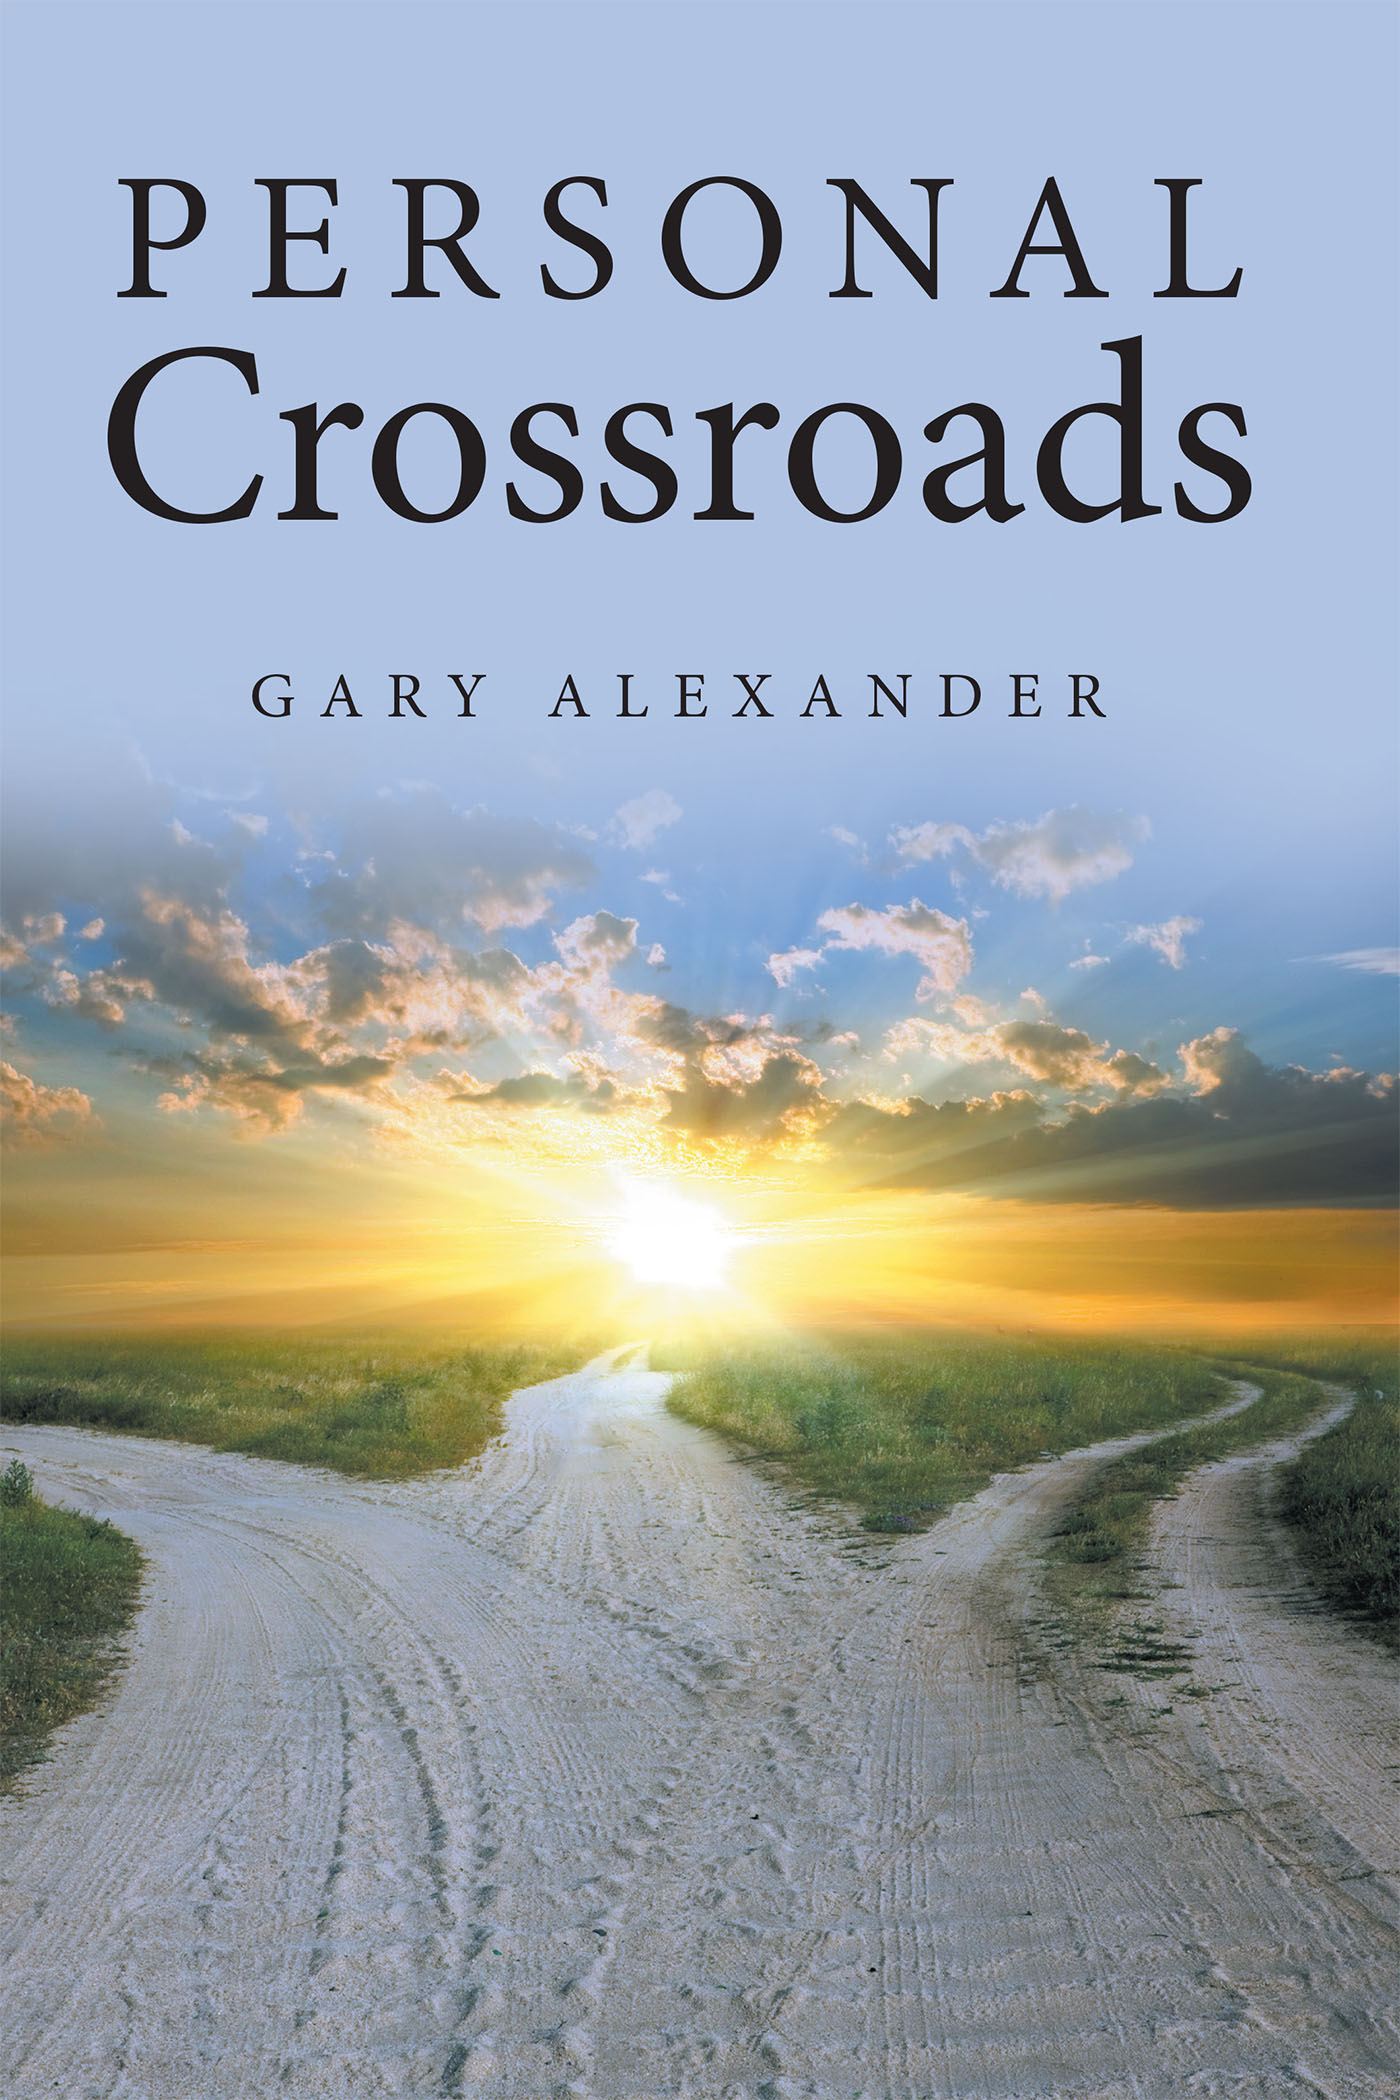 Gary Alexander’s Newly Released "Personal Crossroads" is a Concise and Engaging Story of Unexpected Connections